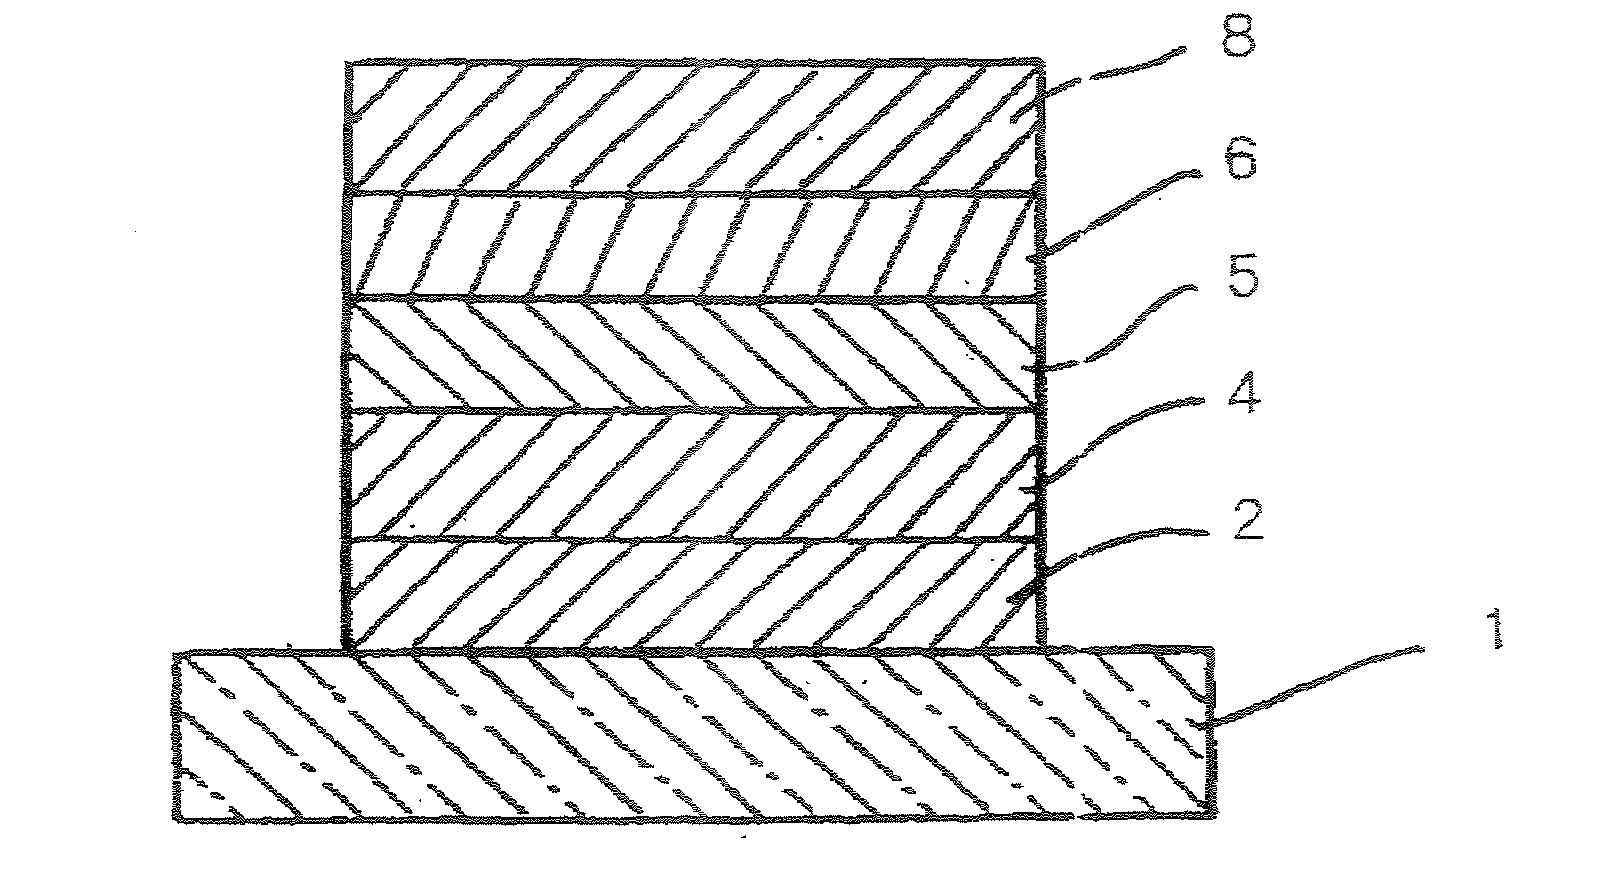 Organic compound, charge transport material and organic electroluminescent device